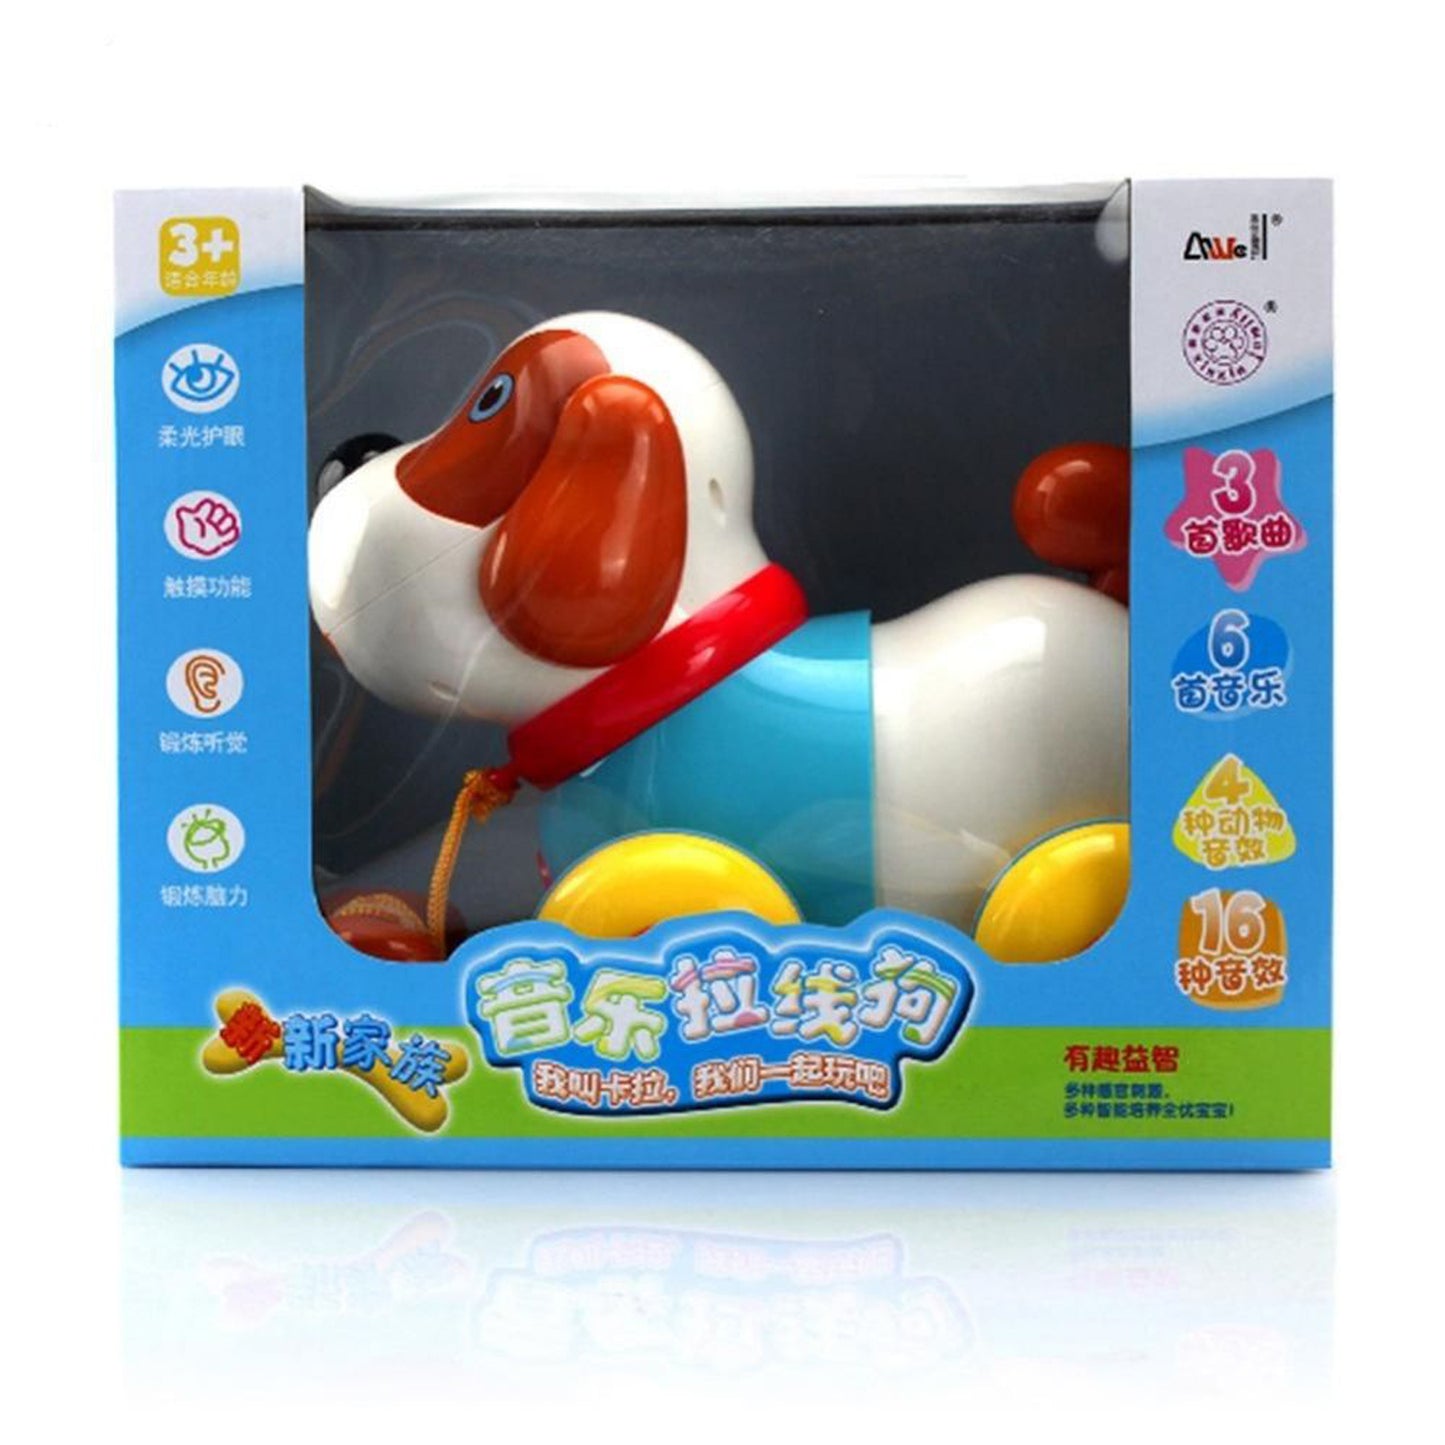 FITTO Electronic Robot Dog Toy